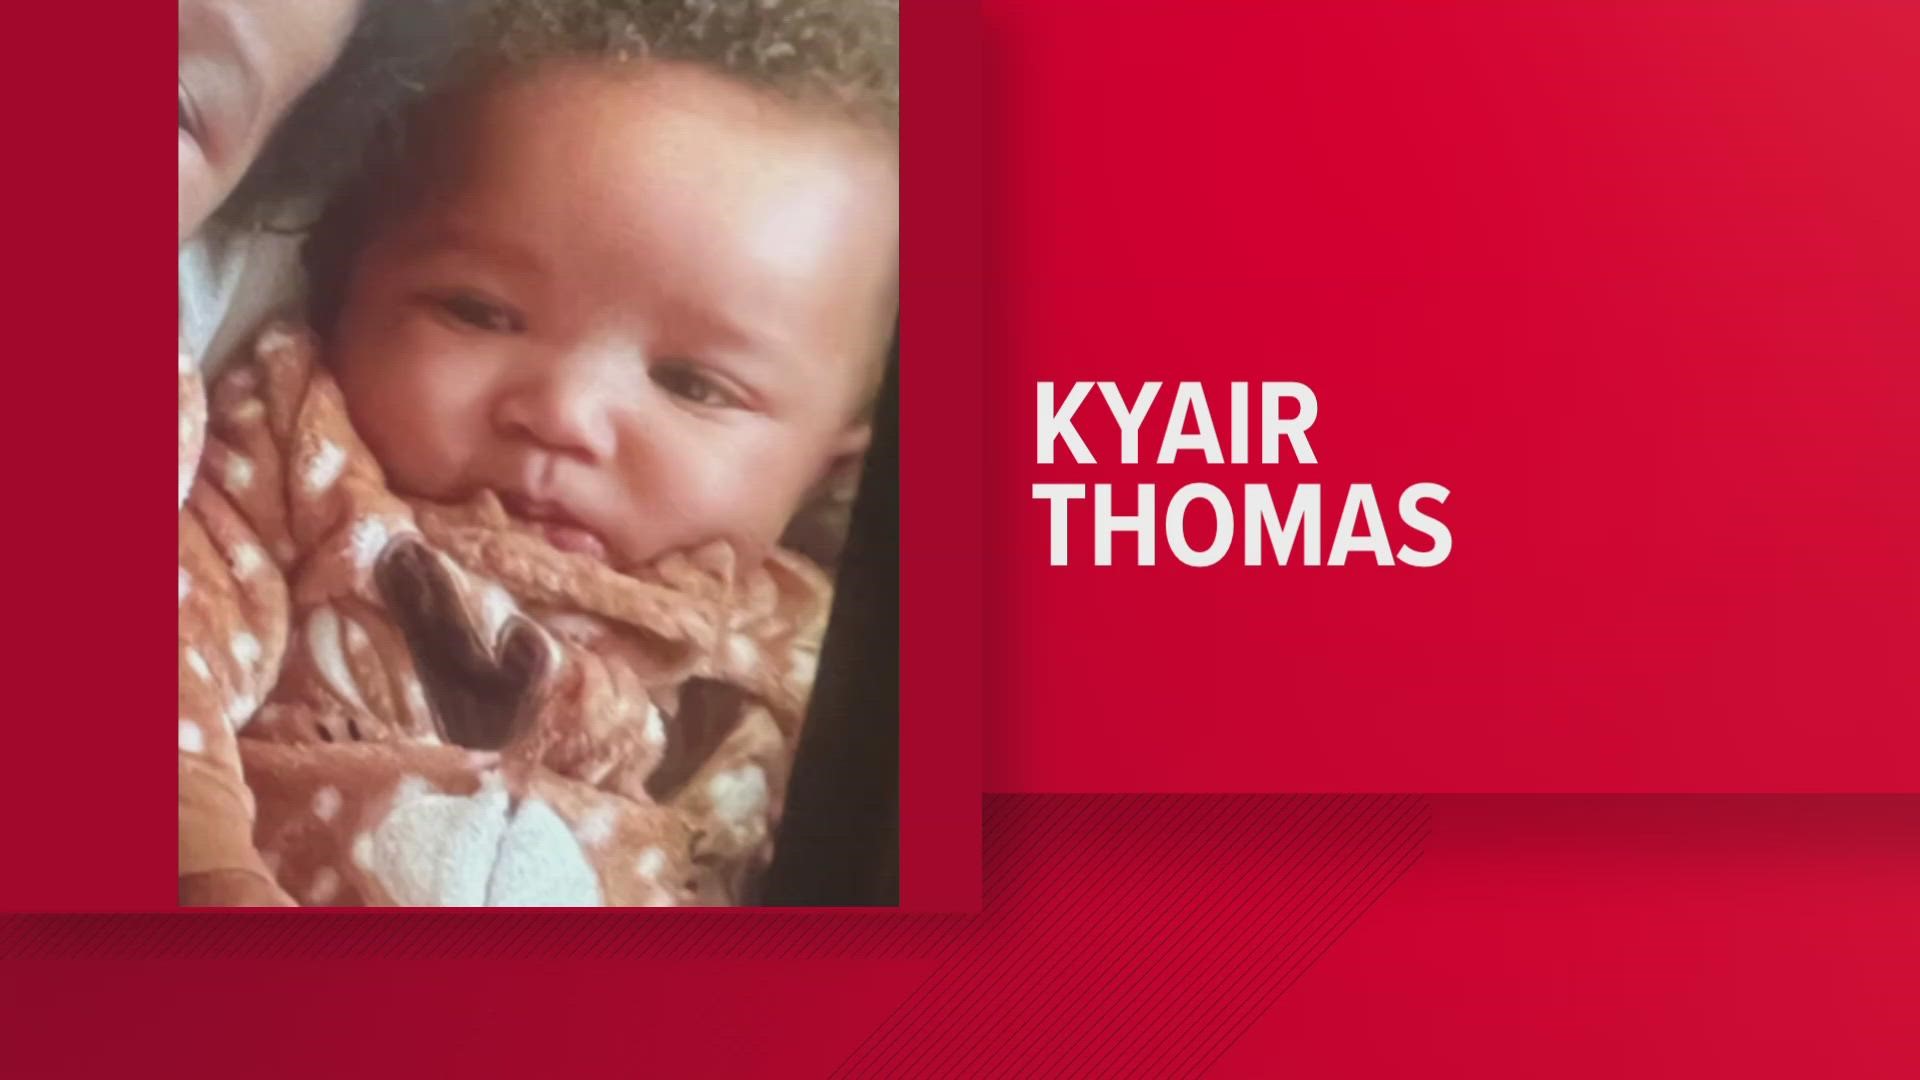 Police: 6-month-old Kyair Thomas was pronounced dead just before midnight Saturday